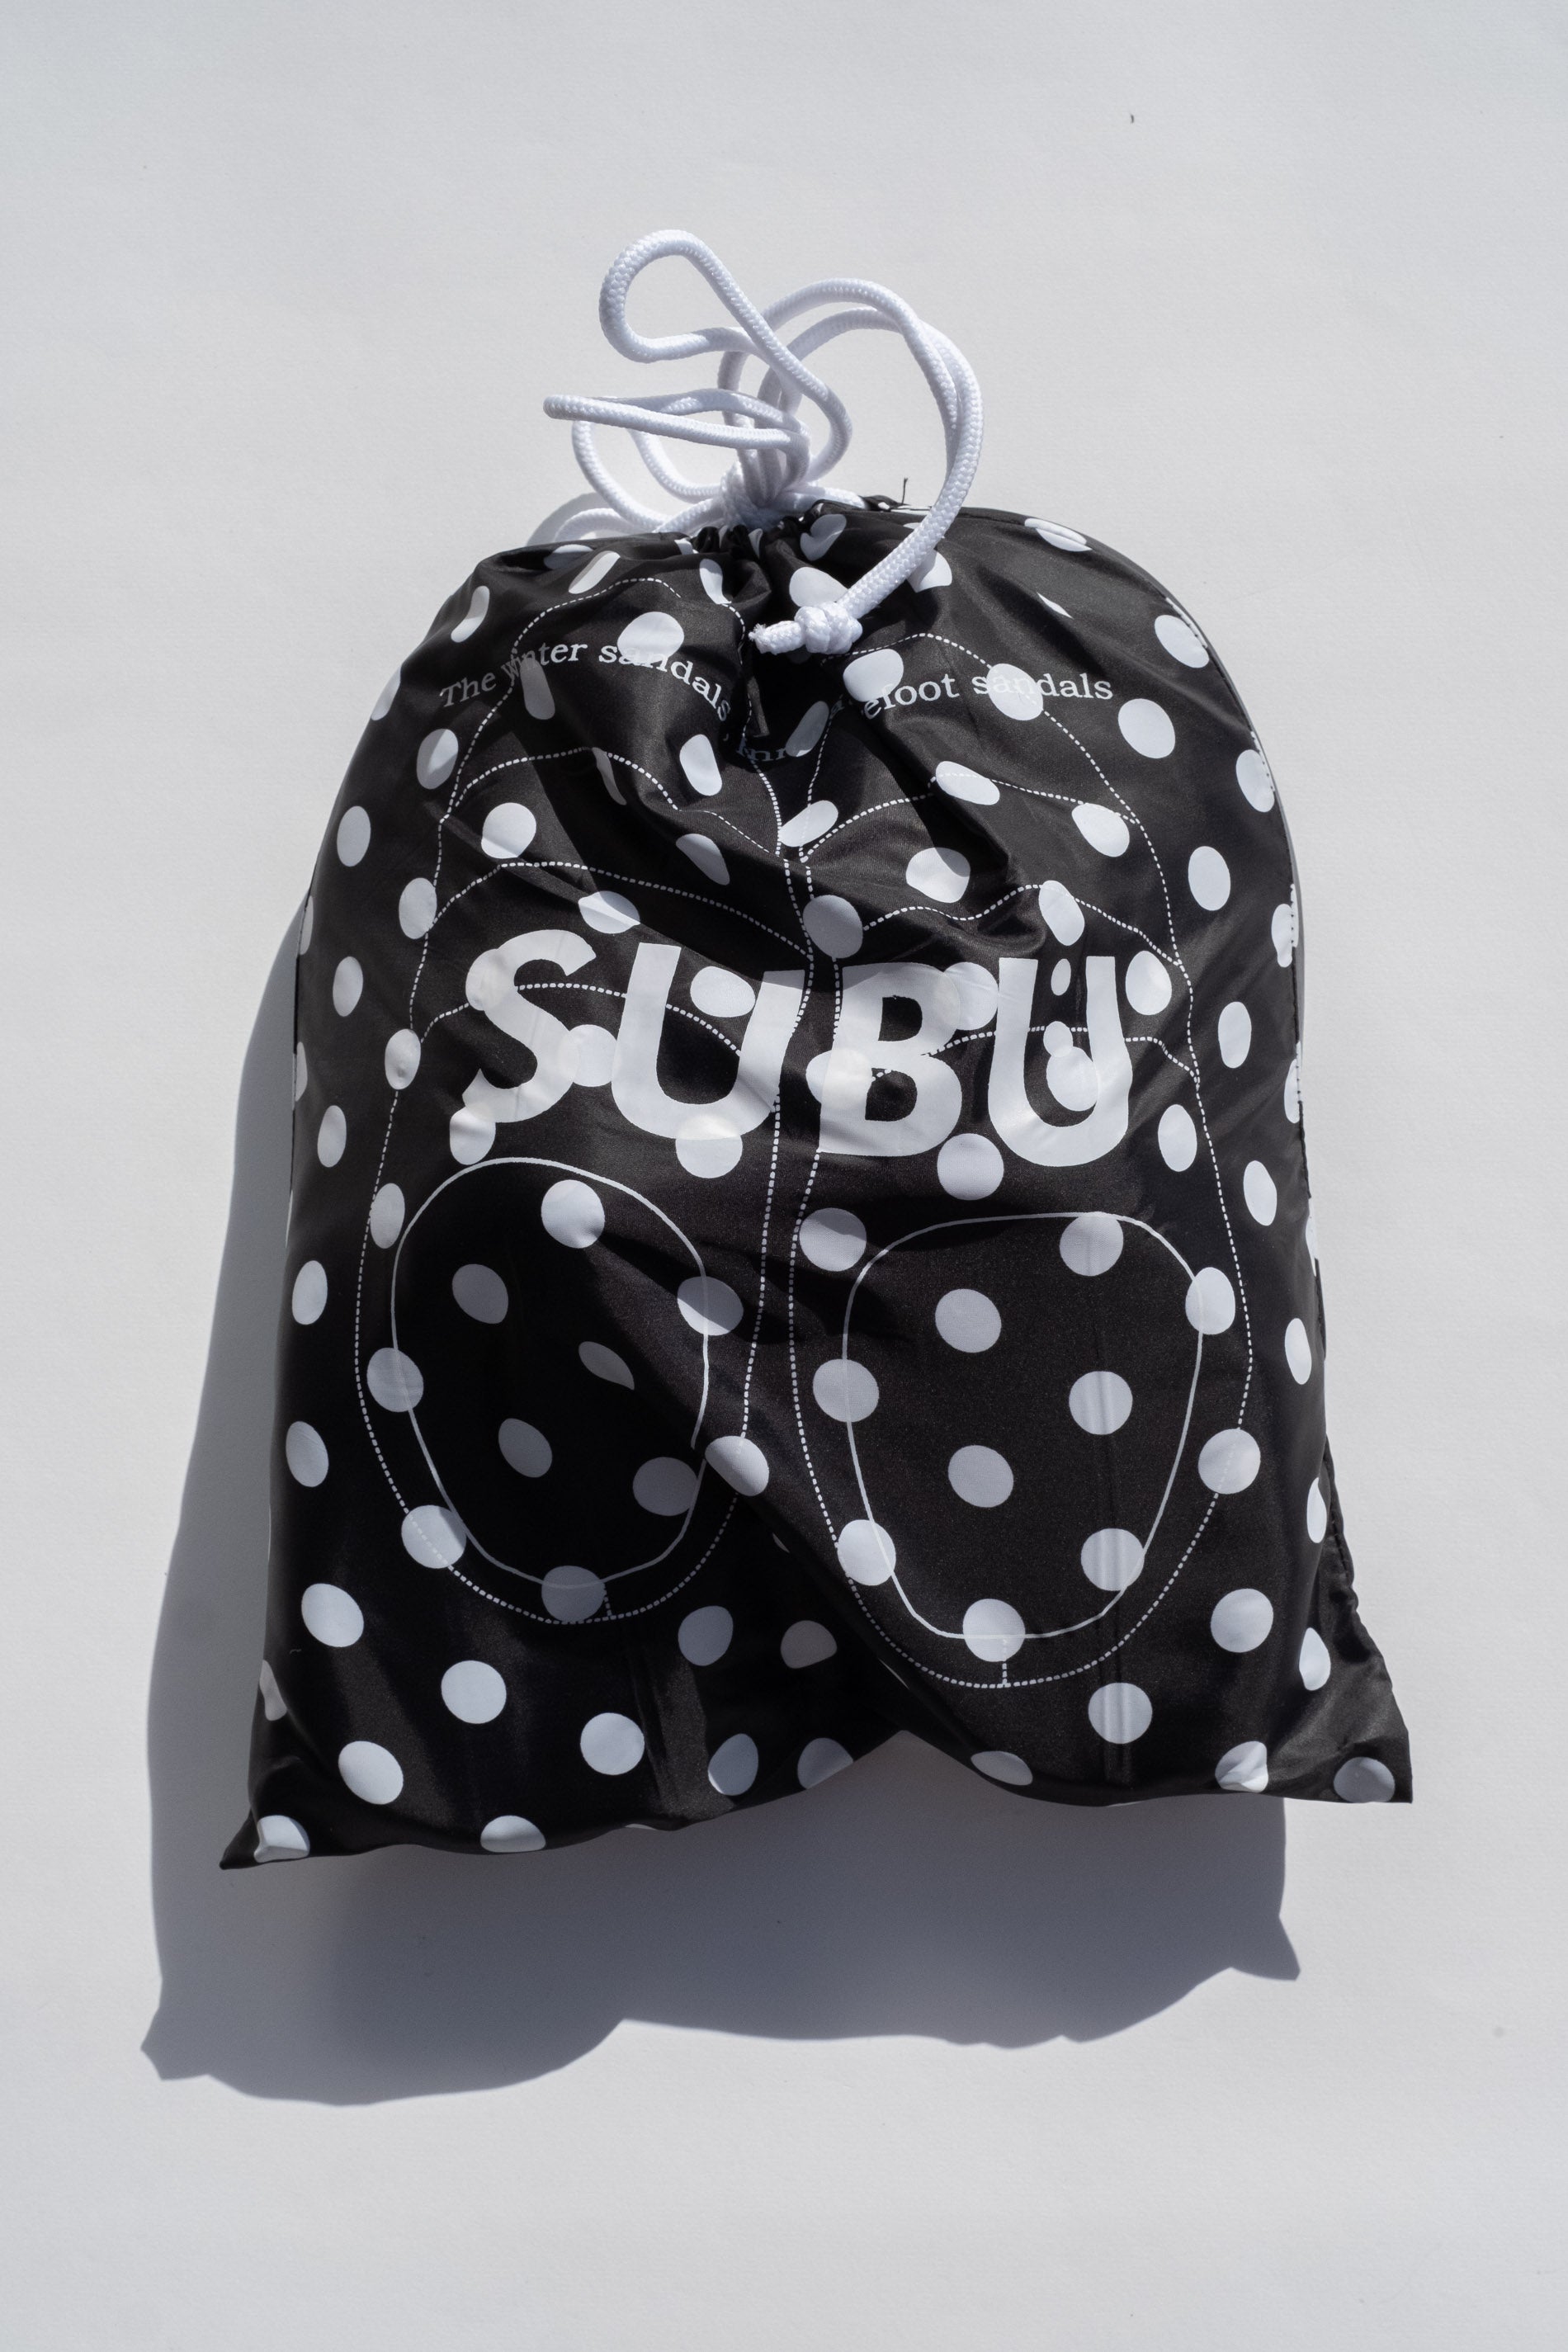 Subu Black Quilted Polka Dot Slippers